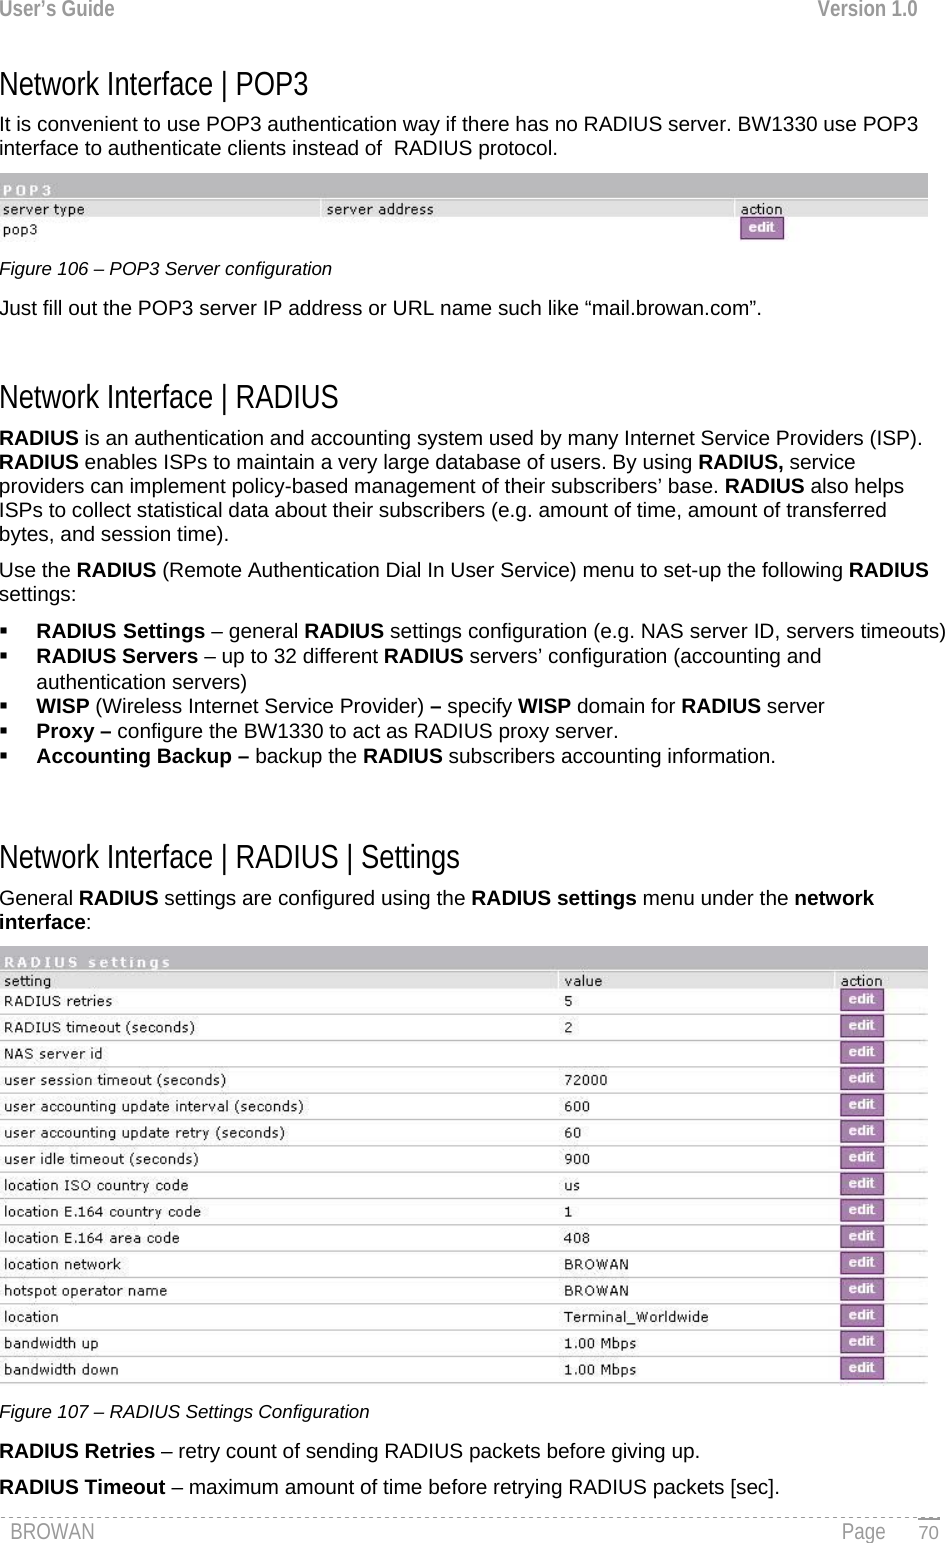 User’s Guide  Version 1.0  Network Interface | POP3 It is convenient to use POP3 authentication way if there has no RADIUS server. BW1330 use POP3 interface to authenticate clients instead of  RADIUS protocol.  Figure 106 – POP3 Server configuration Just fill out the POP3 server IP address or URL name such like “mail.browan.com”.  Network Interface | RADIUS  RADIUS is an authentication and accounting system used by many Internet Service Providers (ISP). RADIUS enables ISPs to maintain a very large database of users. By using RADIUS, service providers can implement policy-based management of their subscribers’ base. RADIUS also helps ISPs to collect statistical data about their subscribers (e.g. amount of time, amount of transferred bytes, and session time).  Use the RADIUS (Remote Authentication Dial In User Service) menu to set-up the following RADIUS settings:  RADIUS Settings – general RADIUS settings configuration (e.g. NAS server ID, servers timeouts)  RADIUS Servers – up to 32 different RADIUS servers’ configuration (accounting and authentication servers)  WISP (Wireless Internet Service Provider) – specify WISP domain for RADIUS server  Proxy – configure the BW1330 to act as RADIUS proxy server.  Accounting Backup – backup the RADIUS subscribers accounting information.   Network Interface | RADIUS | Settings General RADIUS settings are configured using the RADIUS settings menu under the network interface:  Figure 107 – RADIUS Settings Configuration RADIUS Retries – retry count of sending RADIUS packets before giving up. RADIUS Timeout – maximum amount of time before retrying RADIUS packets [sec]. BROWAN                                                                                                                                               Page   70